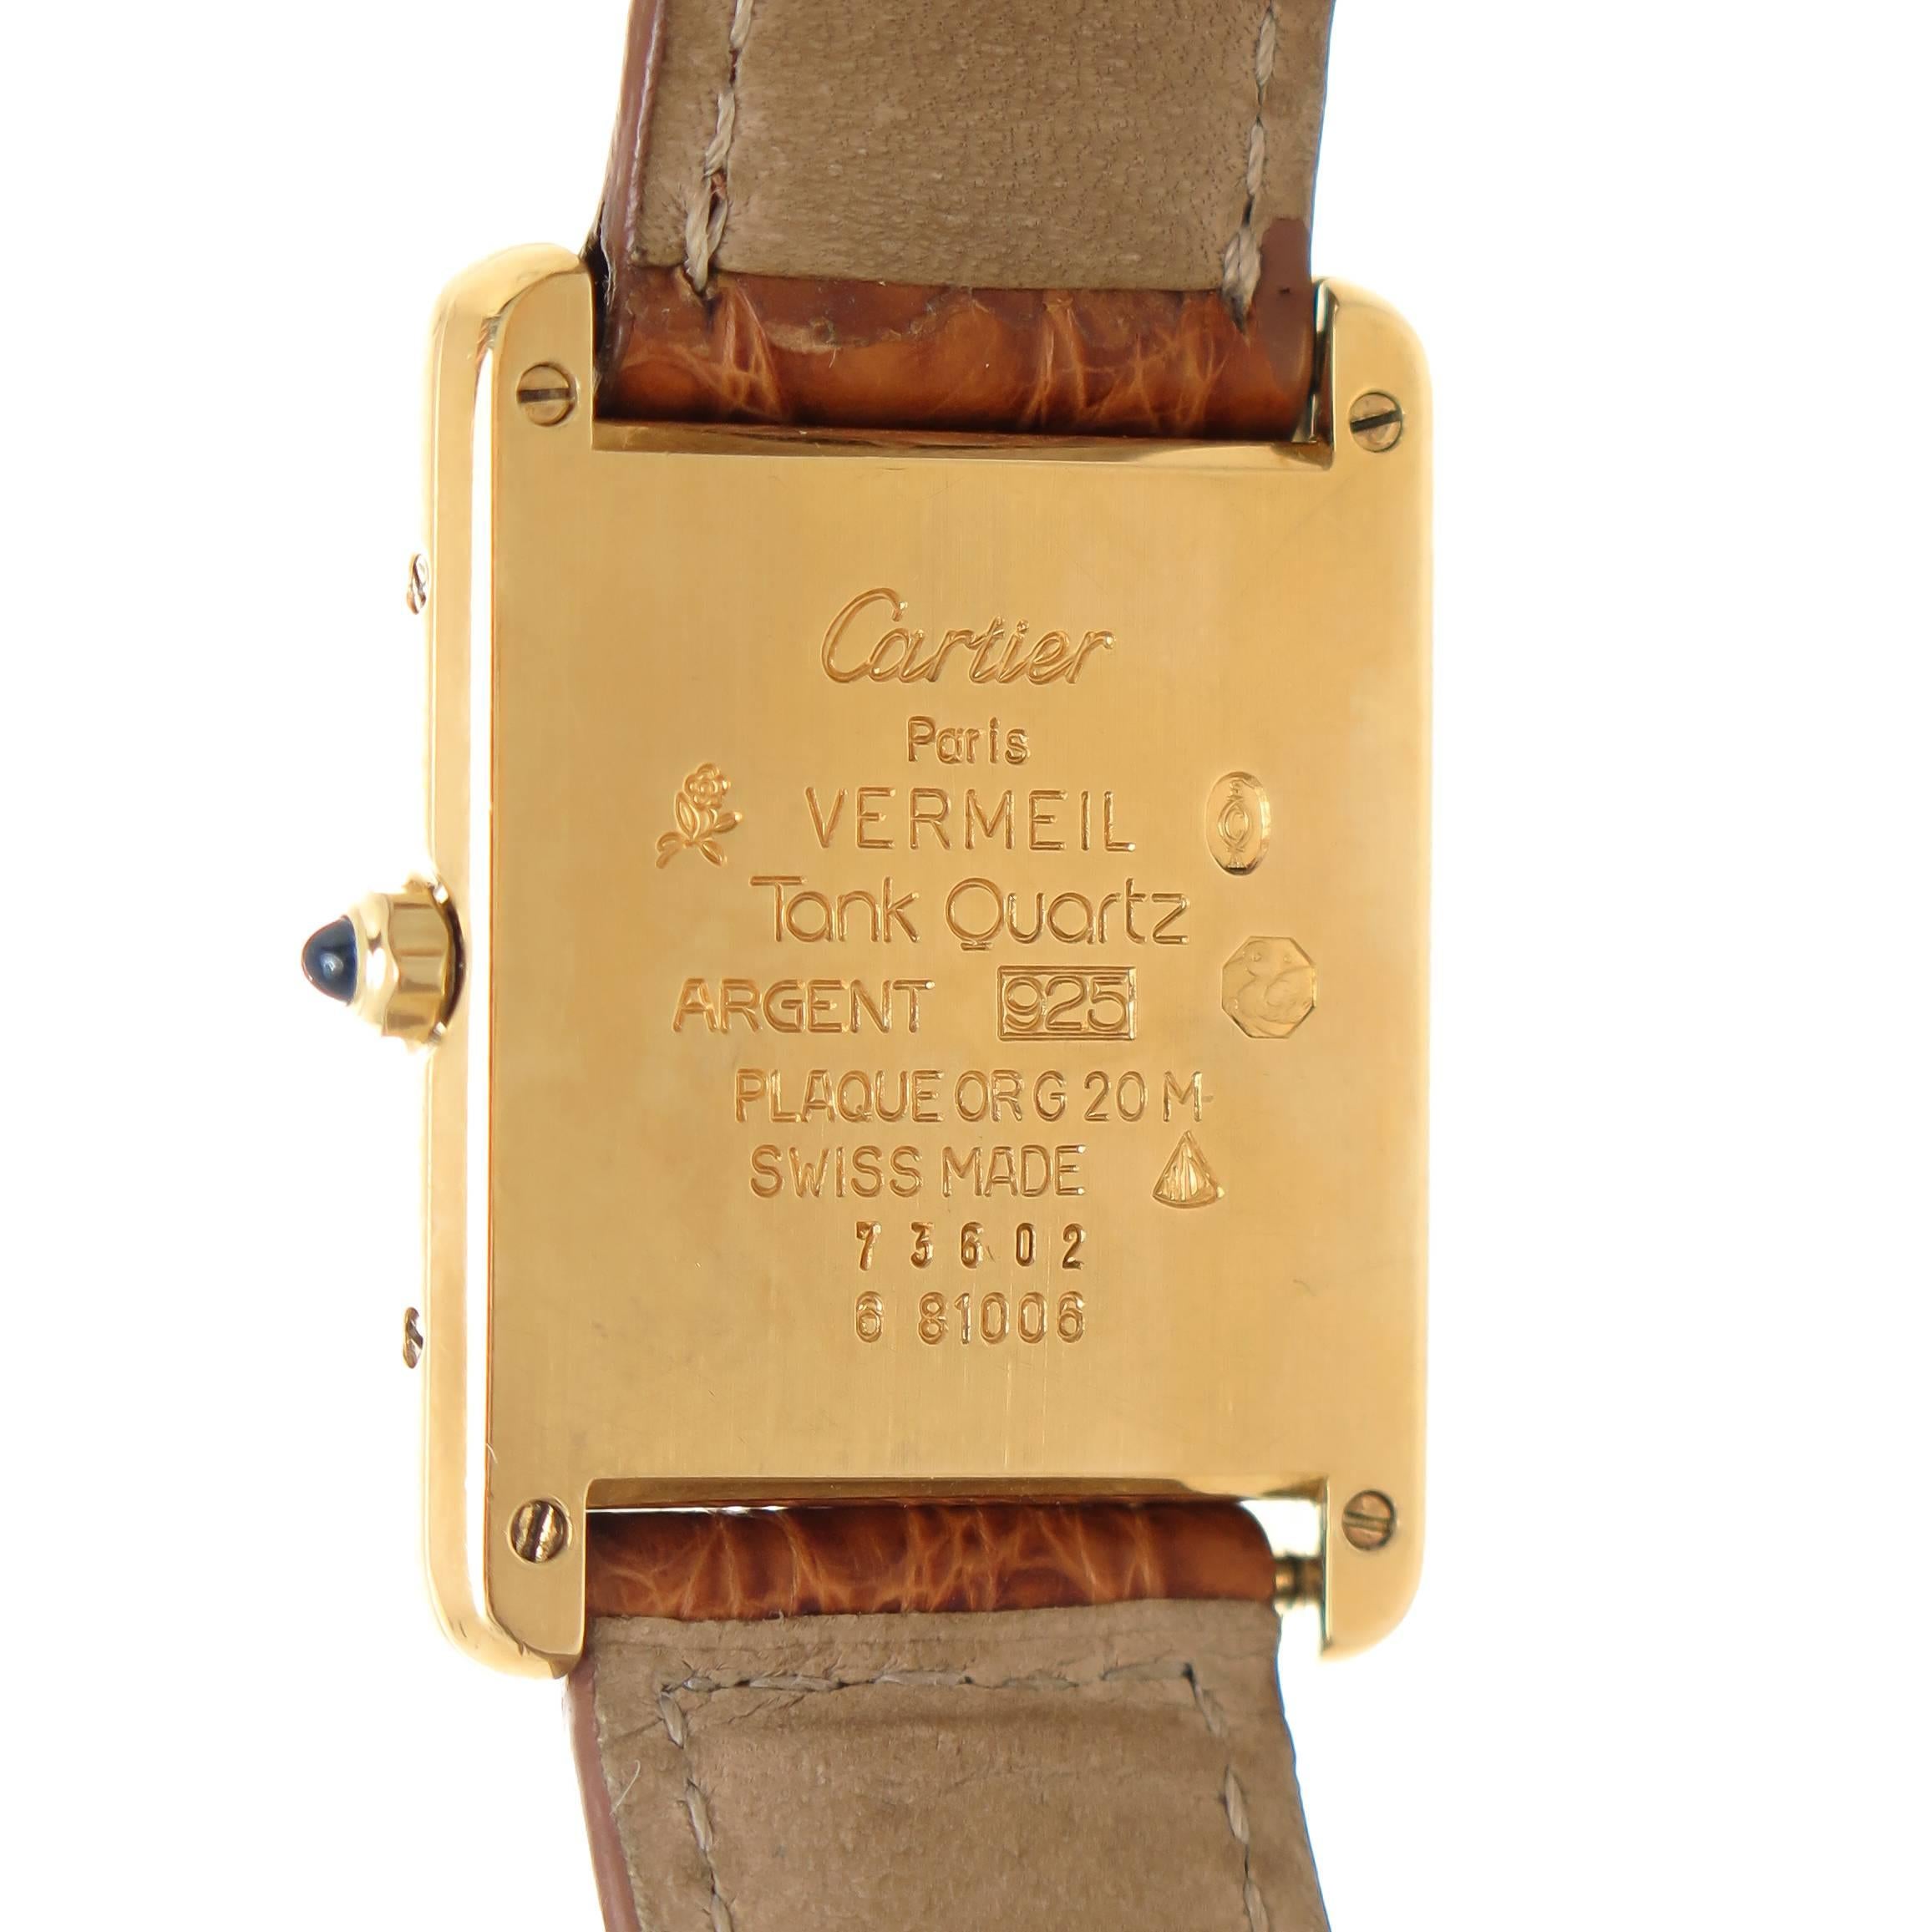 Circa 2010 Cartier Tank Vermeil Wrist Watch, 30 X 23 MM Gold Plate on sterling Case, Custom set Diamonds on each side of the case totaling 3/4 carat. Quartz Movement, Gold Dial with Black Roman Numerals. Light Brown Cartier Strap with Gold Plate